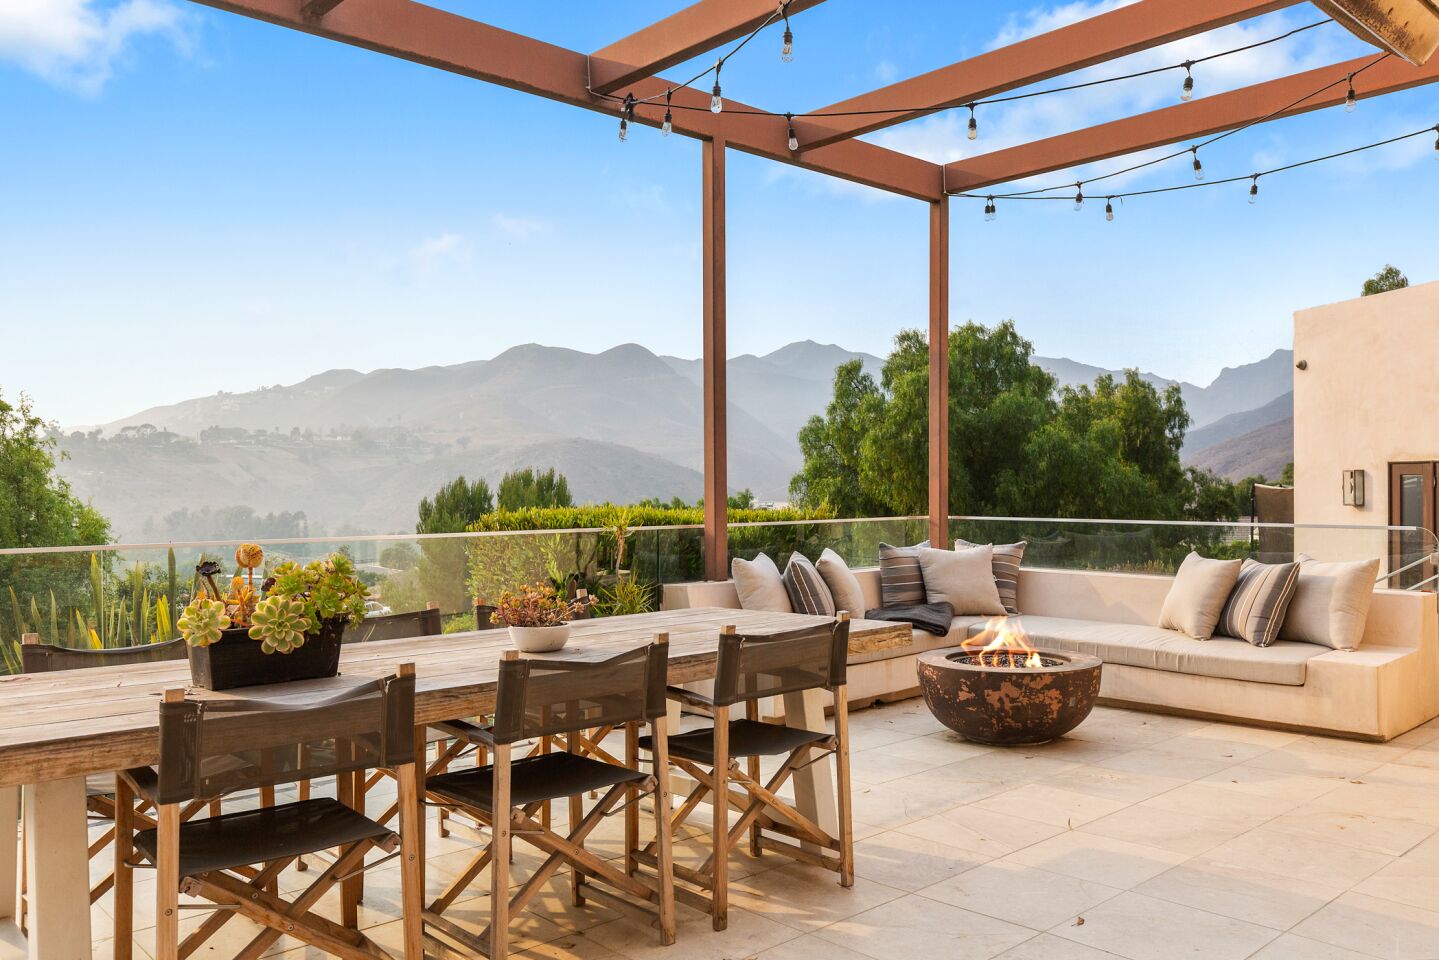 The deck has seating around a fire pit and a dining table with views of the hills.